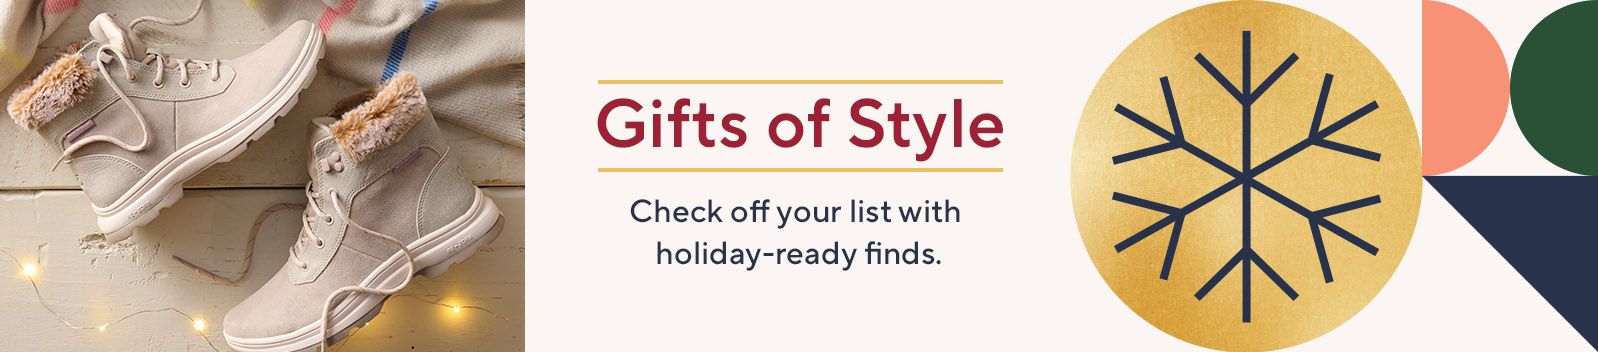 Gifts of Style: Check off your list with holiday-ready finds.